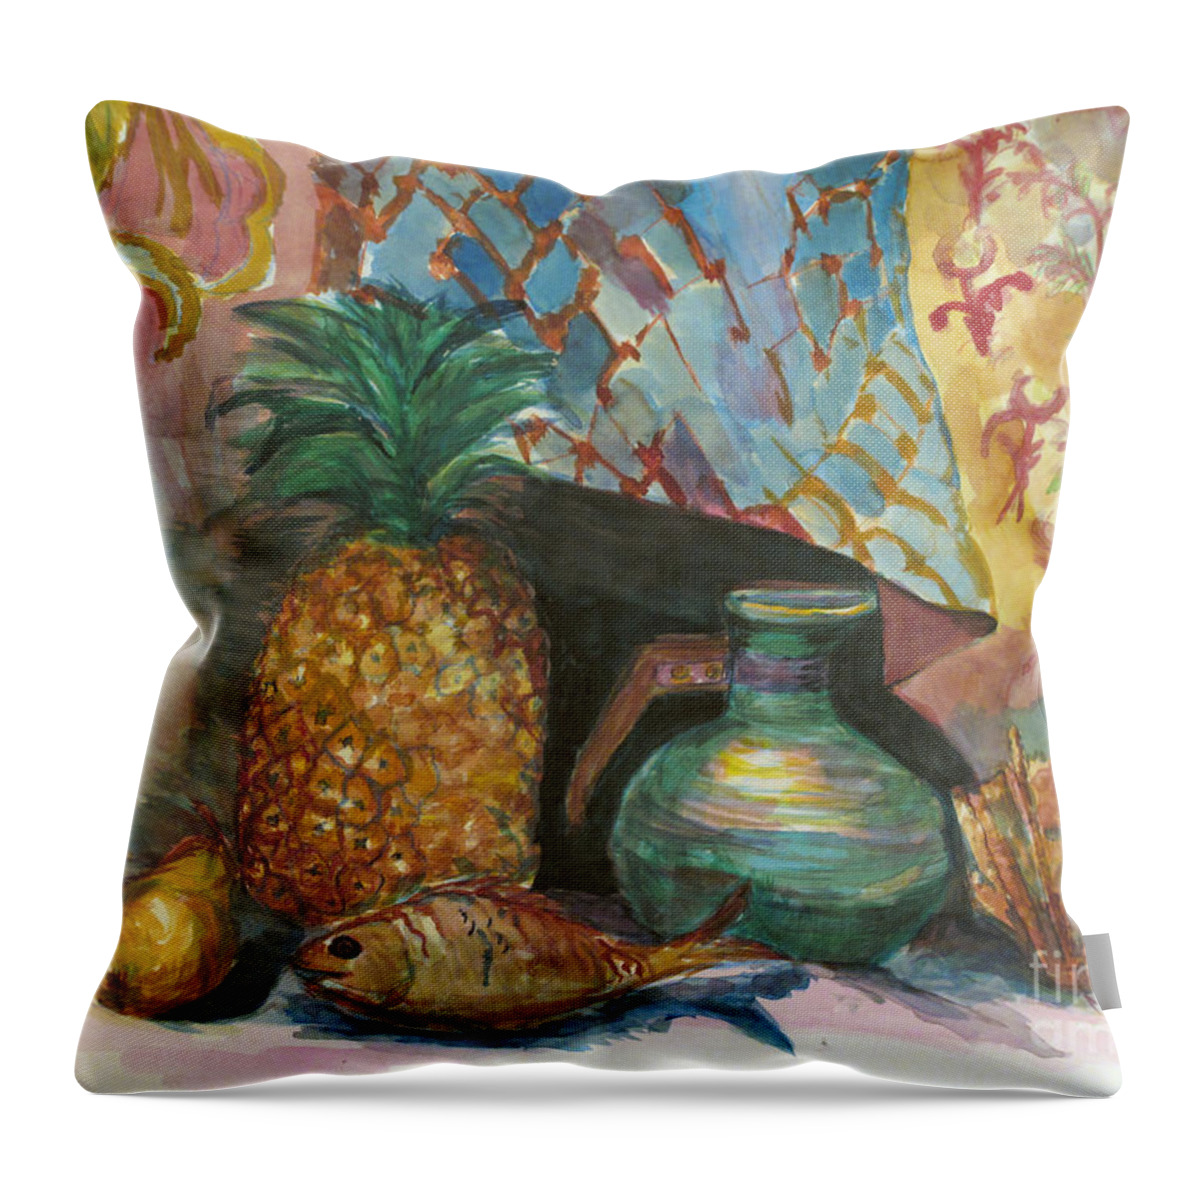 Still Life Throw Pillow featuring the painting Hospitality by Carol Oufnac Mahan